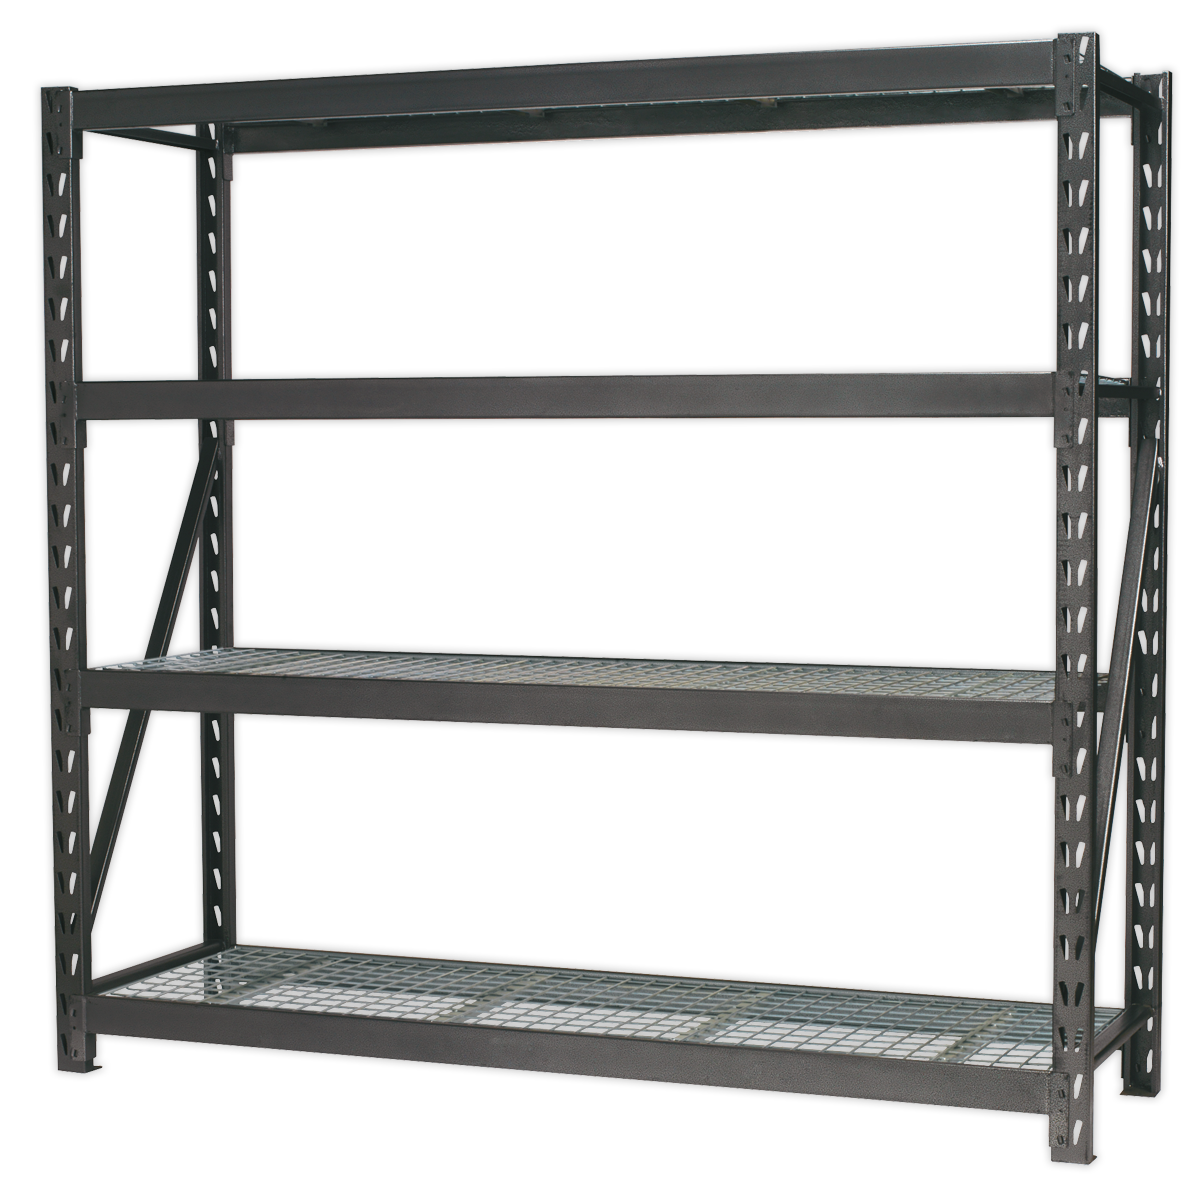 Sealey Heavy-Duty Racking Unit with 4 Mesh Shelves 640kg Capacity Per Level 1956mm